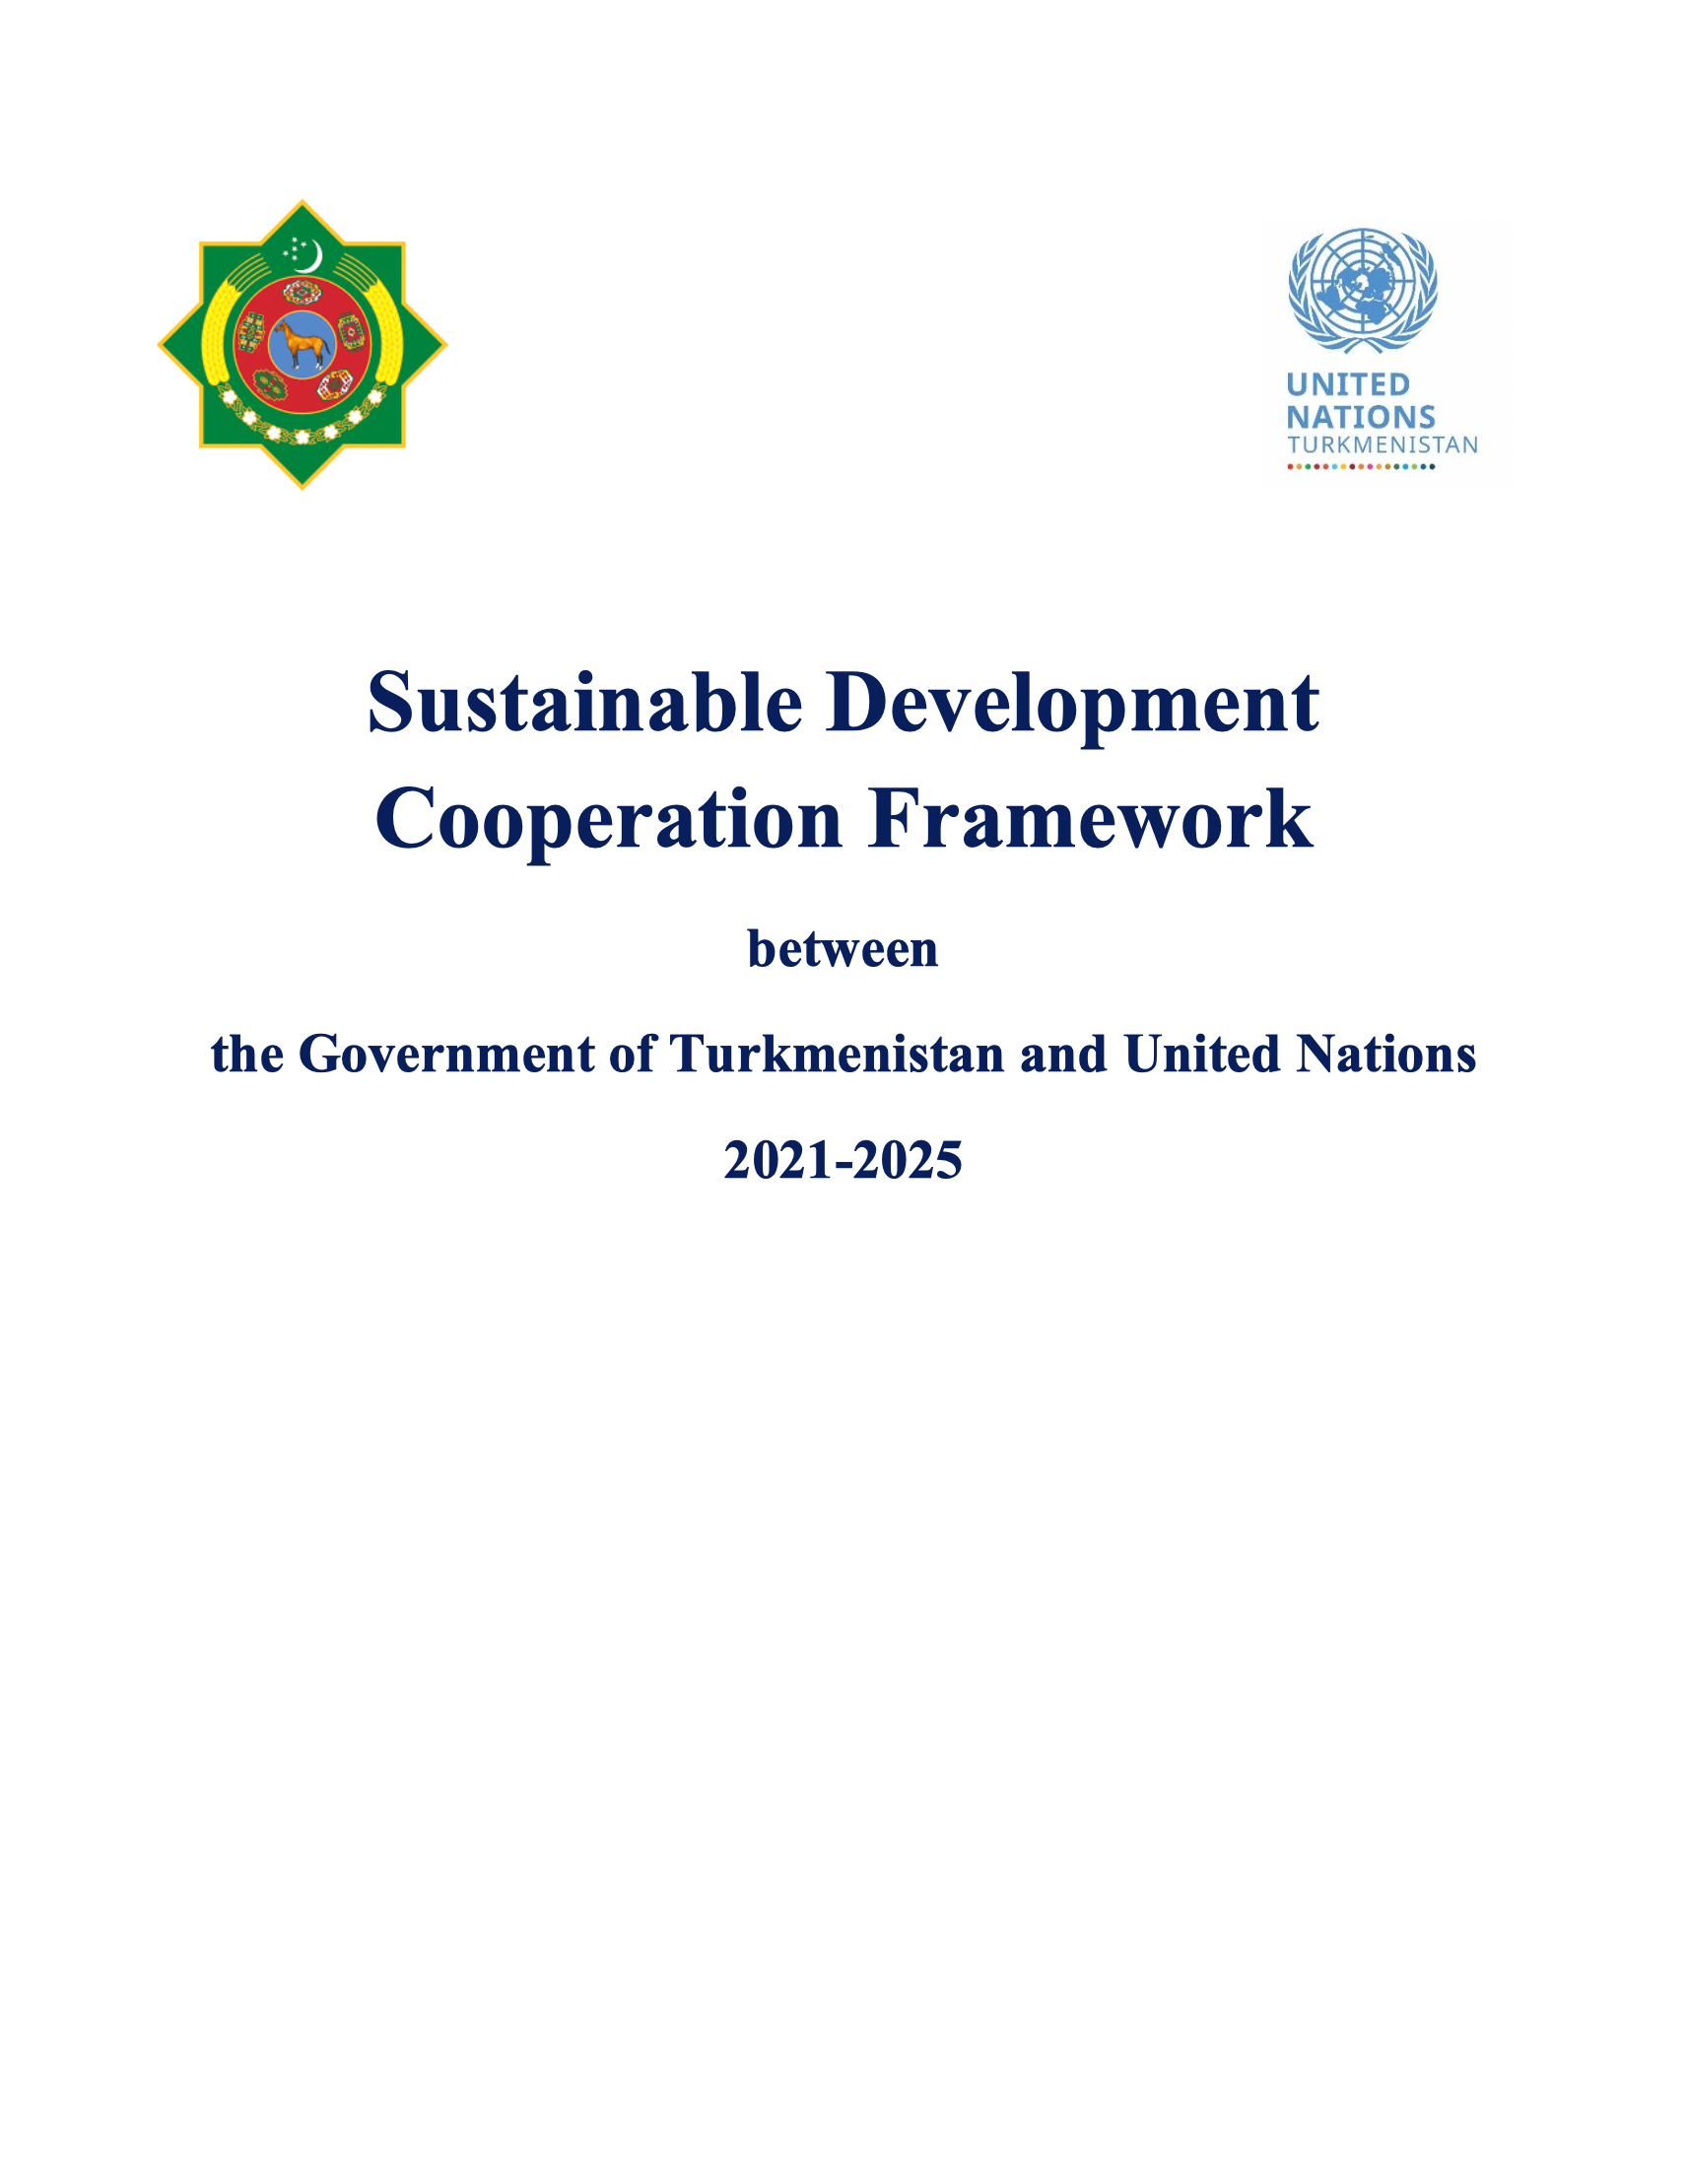 Sustainable Development Cooperation Framework between the Government of Turkmenistan and United Nations 2021-2025